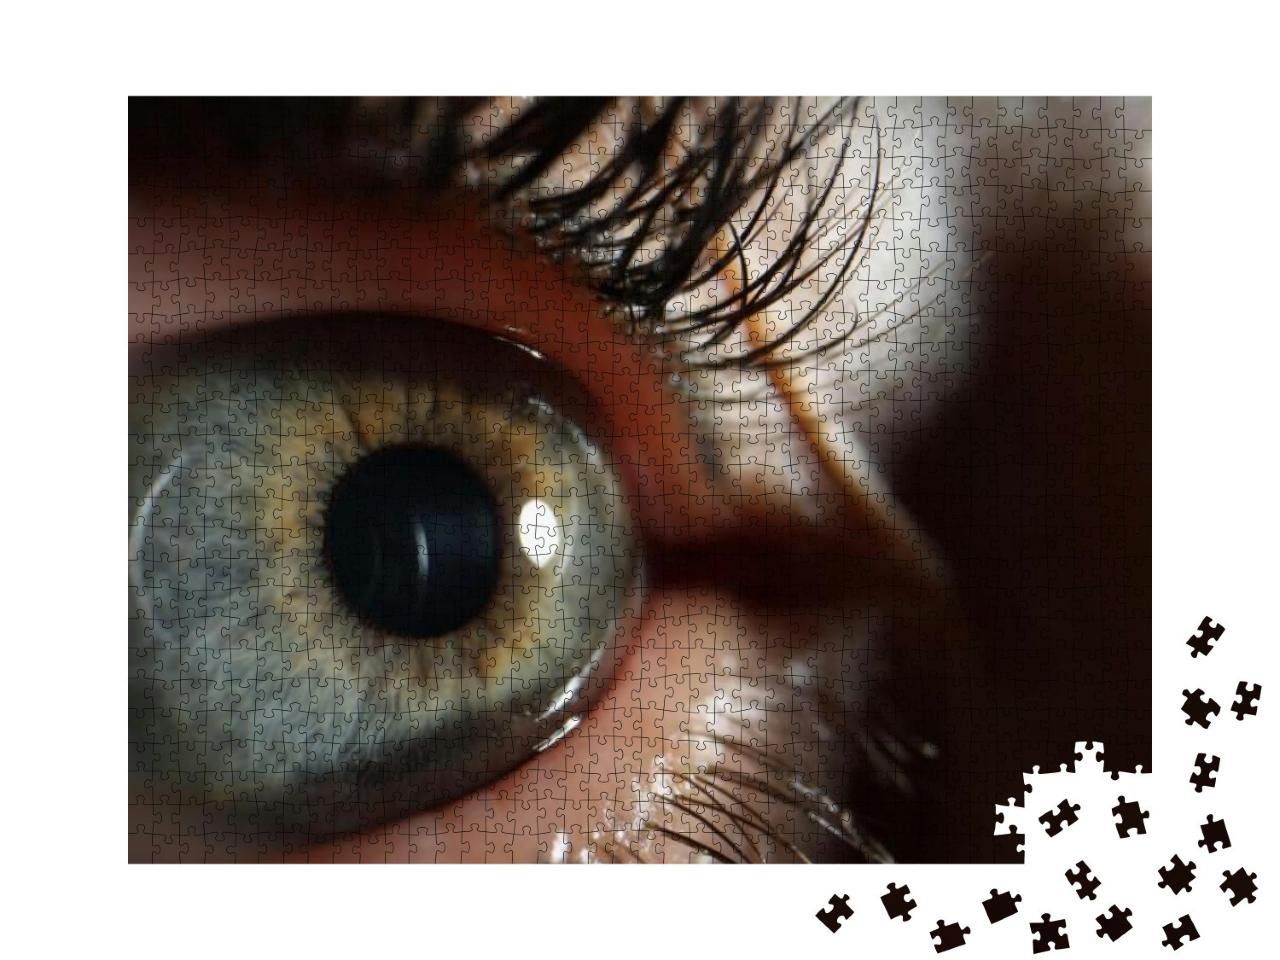 Female Eye with Black Painted Eyelashes Closeup... Jigsaw Puzzle with 1000 pieces